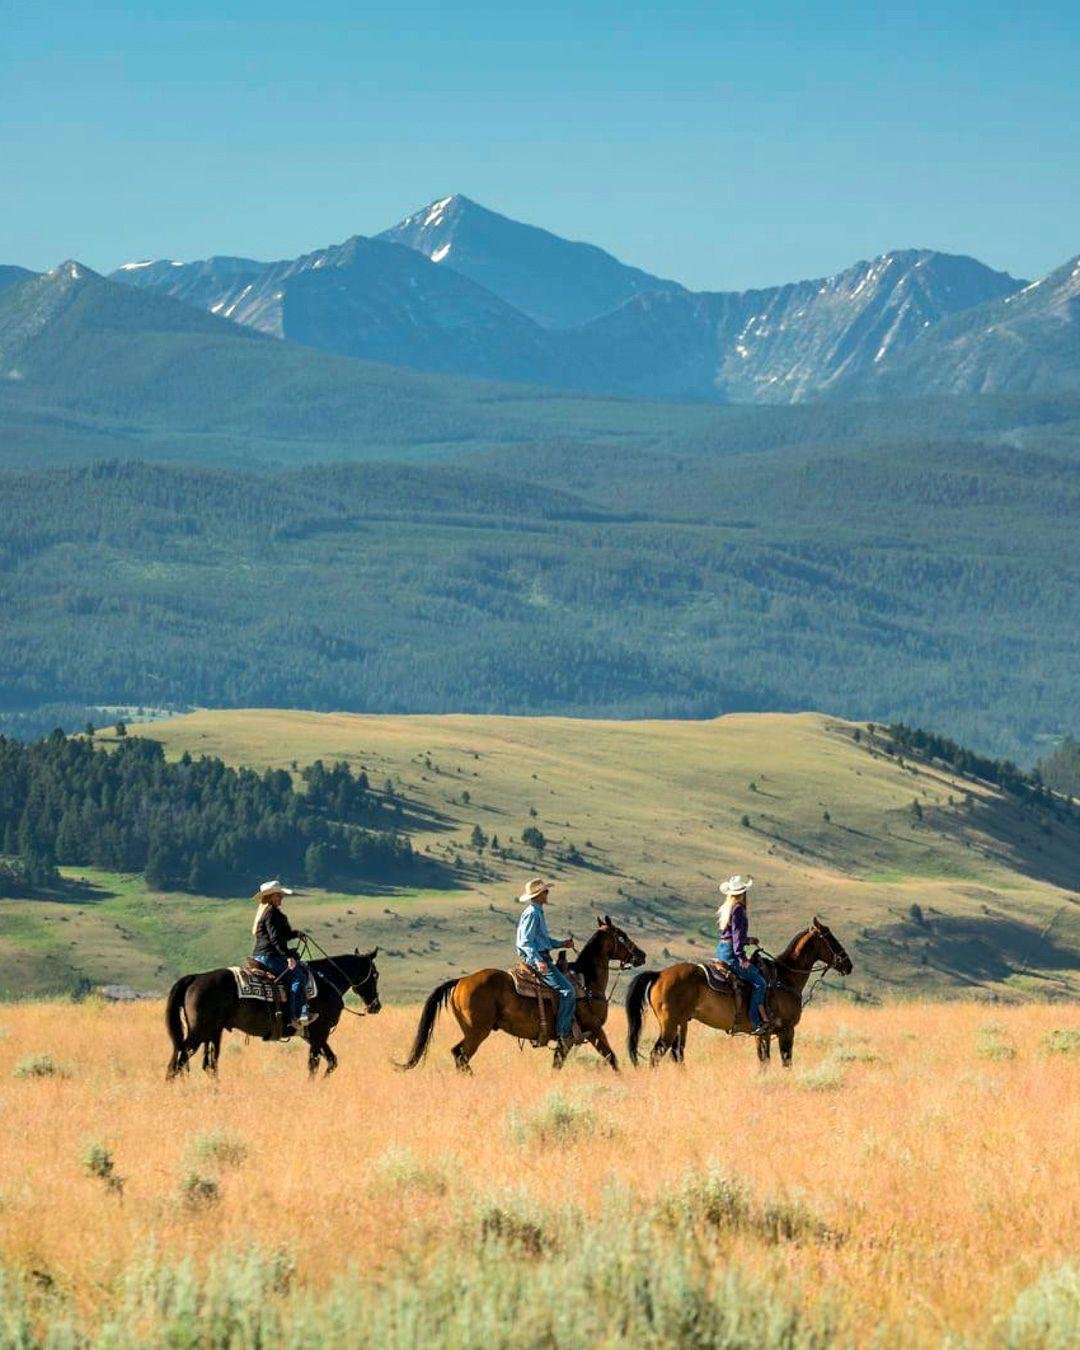 If you're searching for a getaway that will have everyone grinning from ear to ear, The Ranch at Rock Creek is the place to be! This world-renowned Forbes Travel Guide 5-Star Ranch offers an all-inclusive luxury retreat located in the heart of Montan